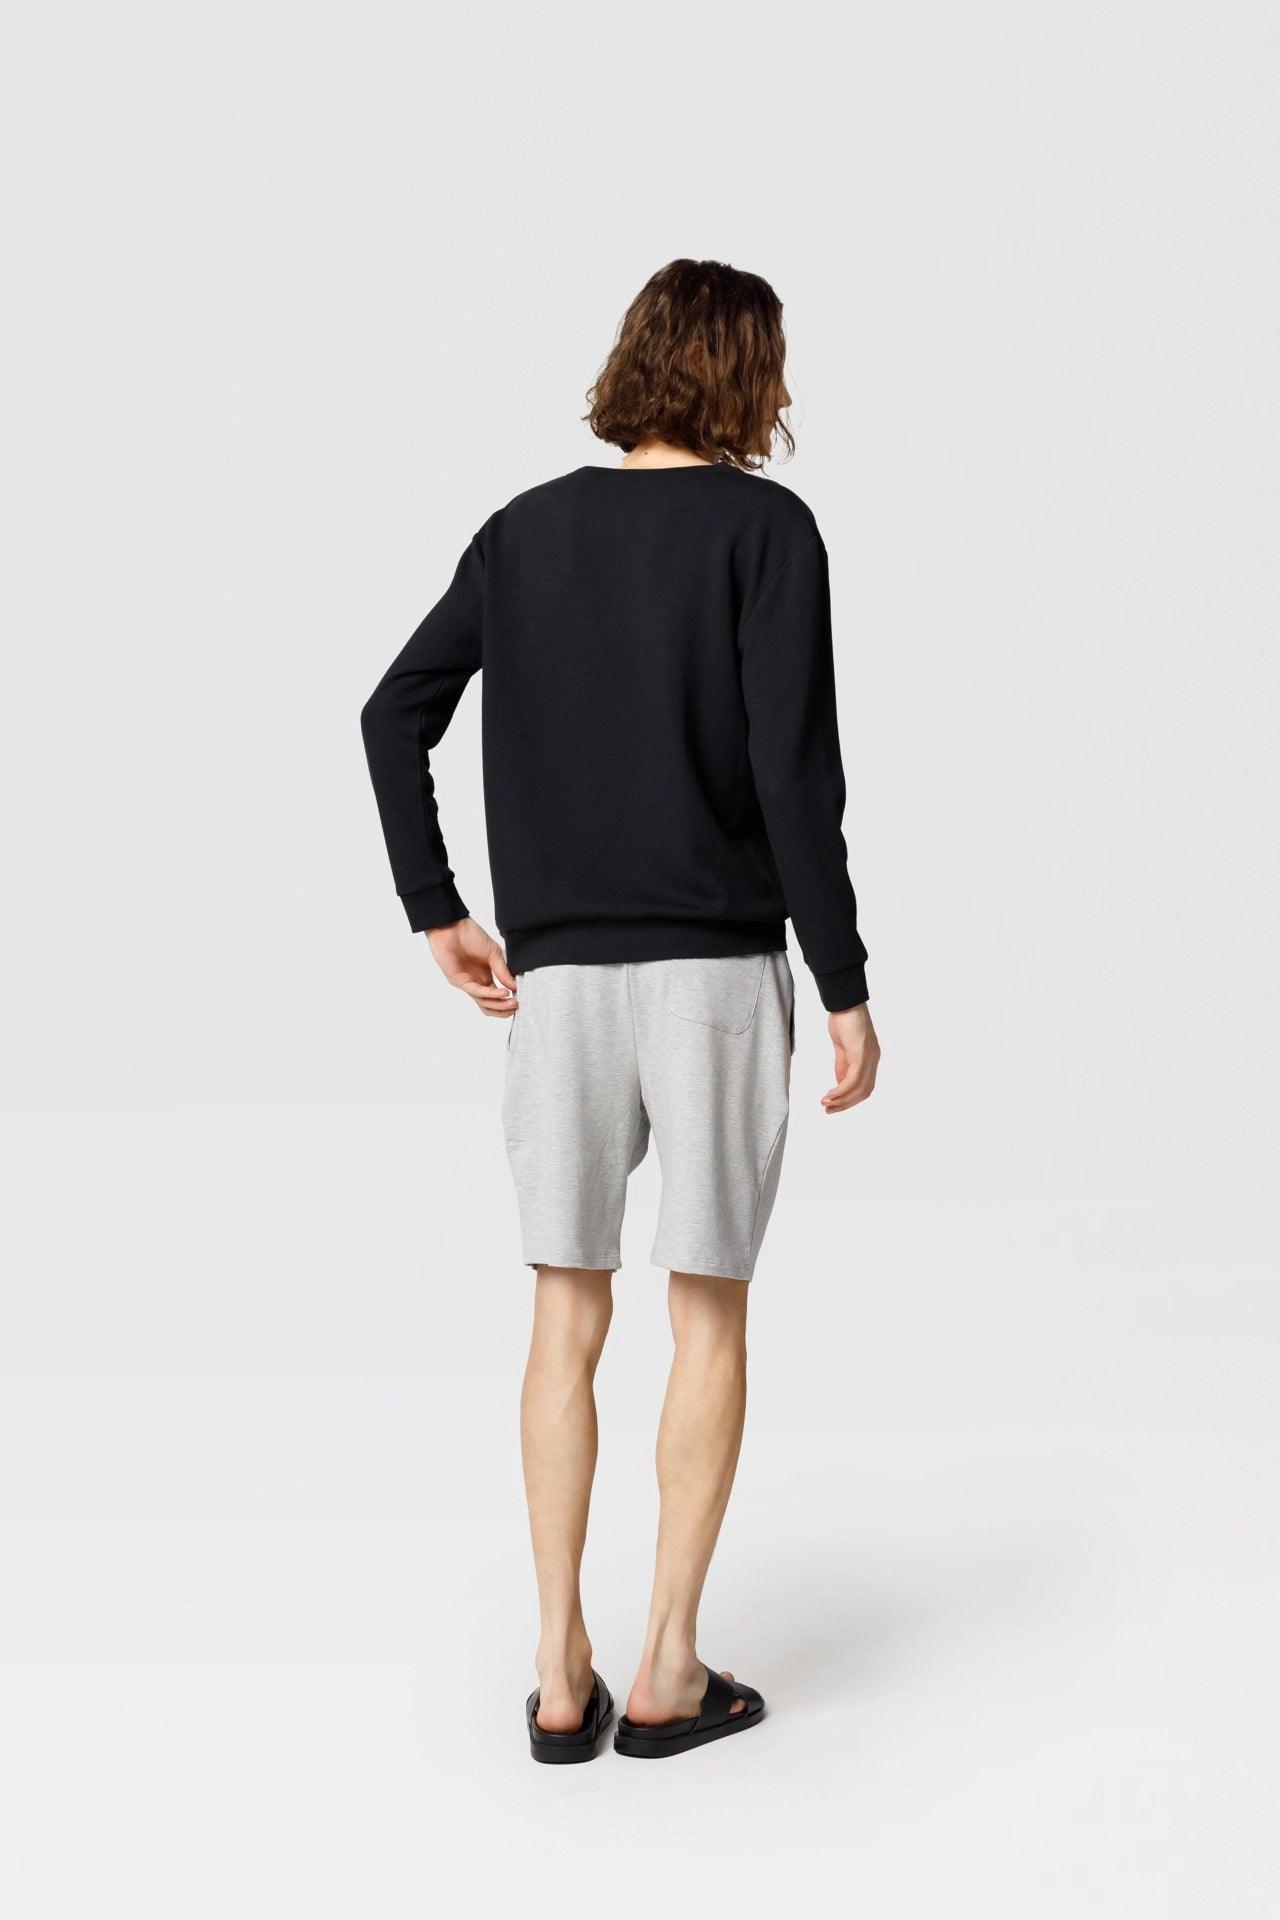 Men's Bamboo Shorts - NOT LABELED